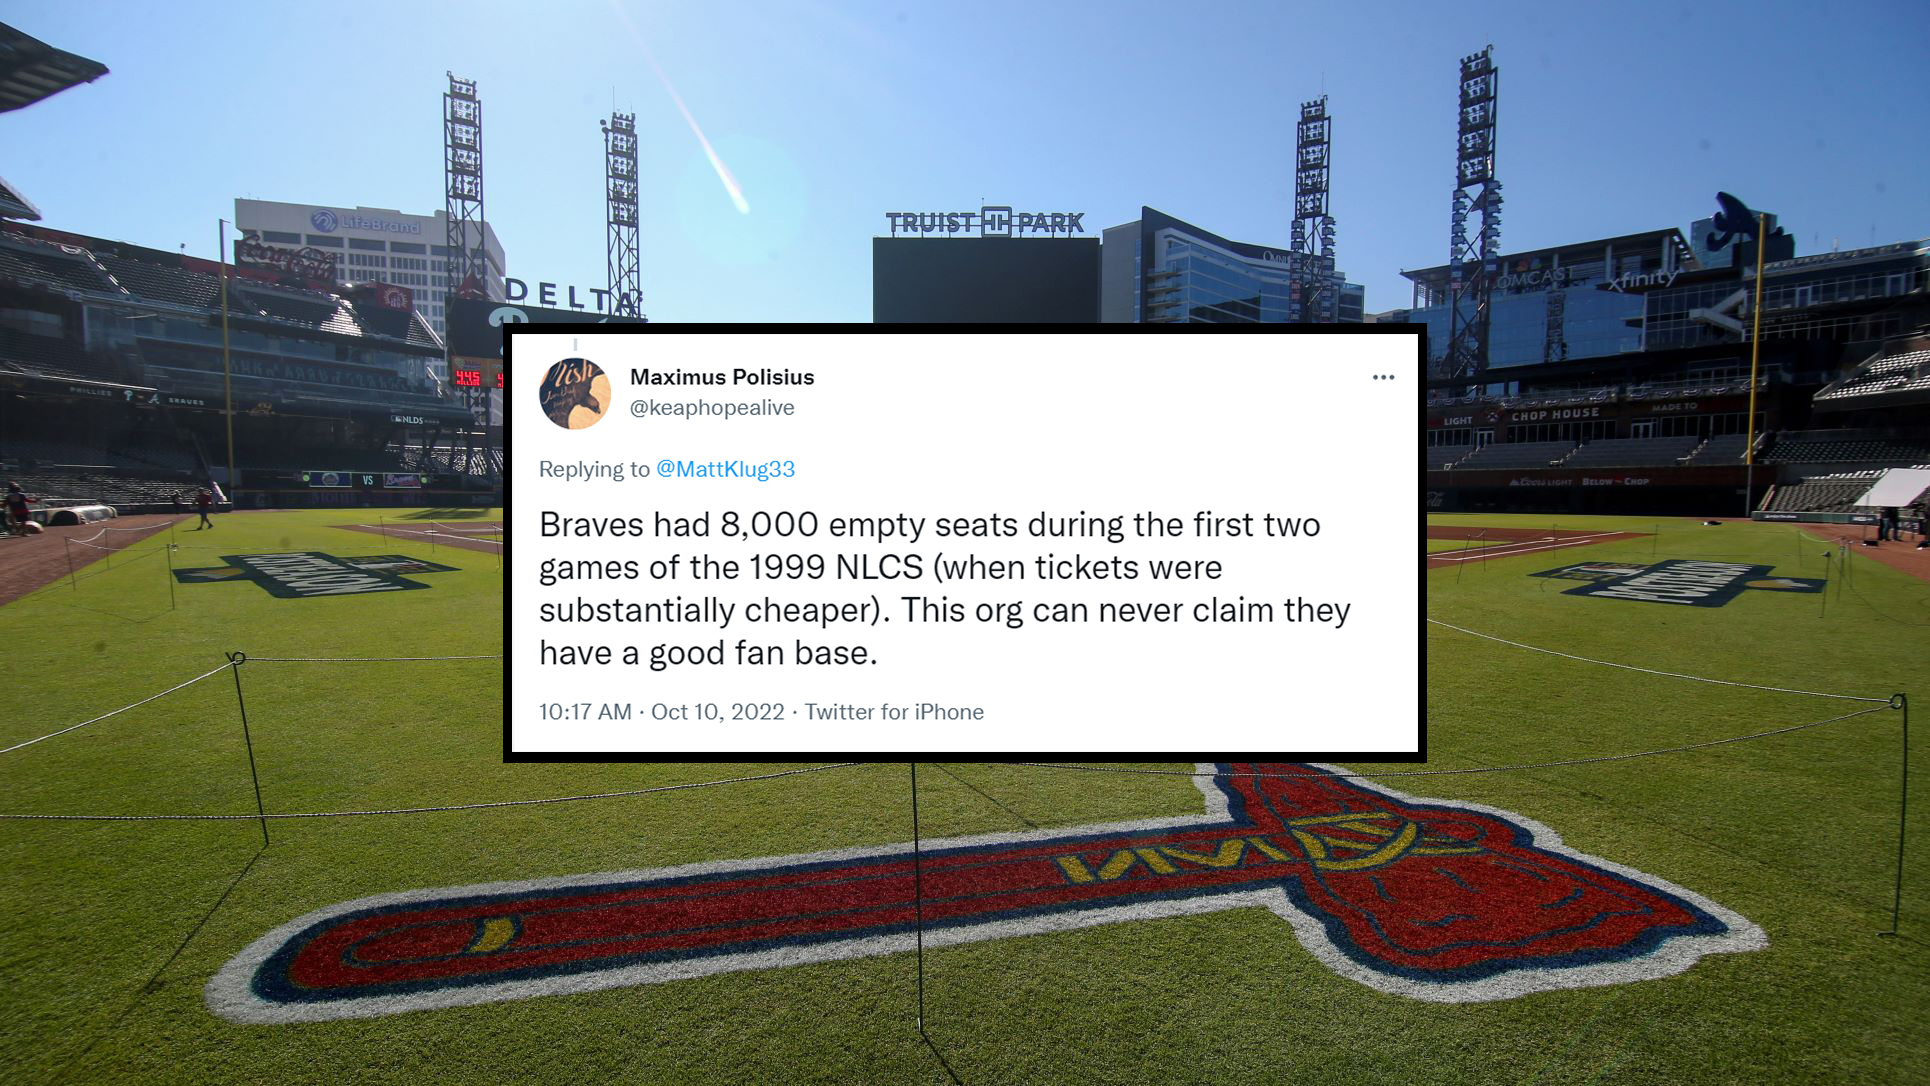 Phillies-Braves 2022 NLDS: Tickets for Games 3, 4 sold out - CBS  Philadelphia